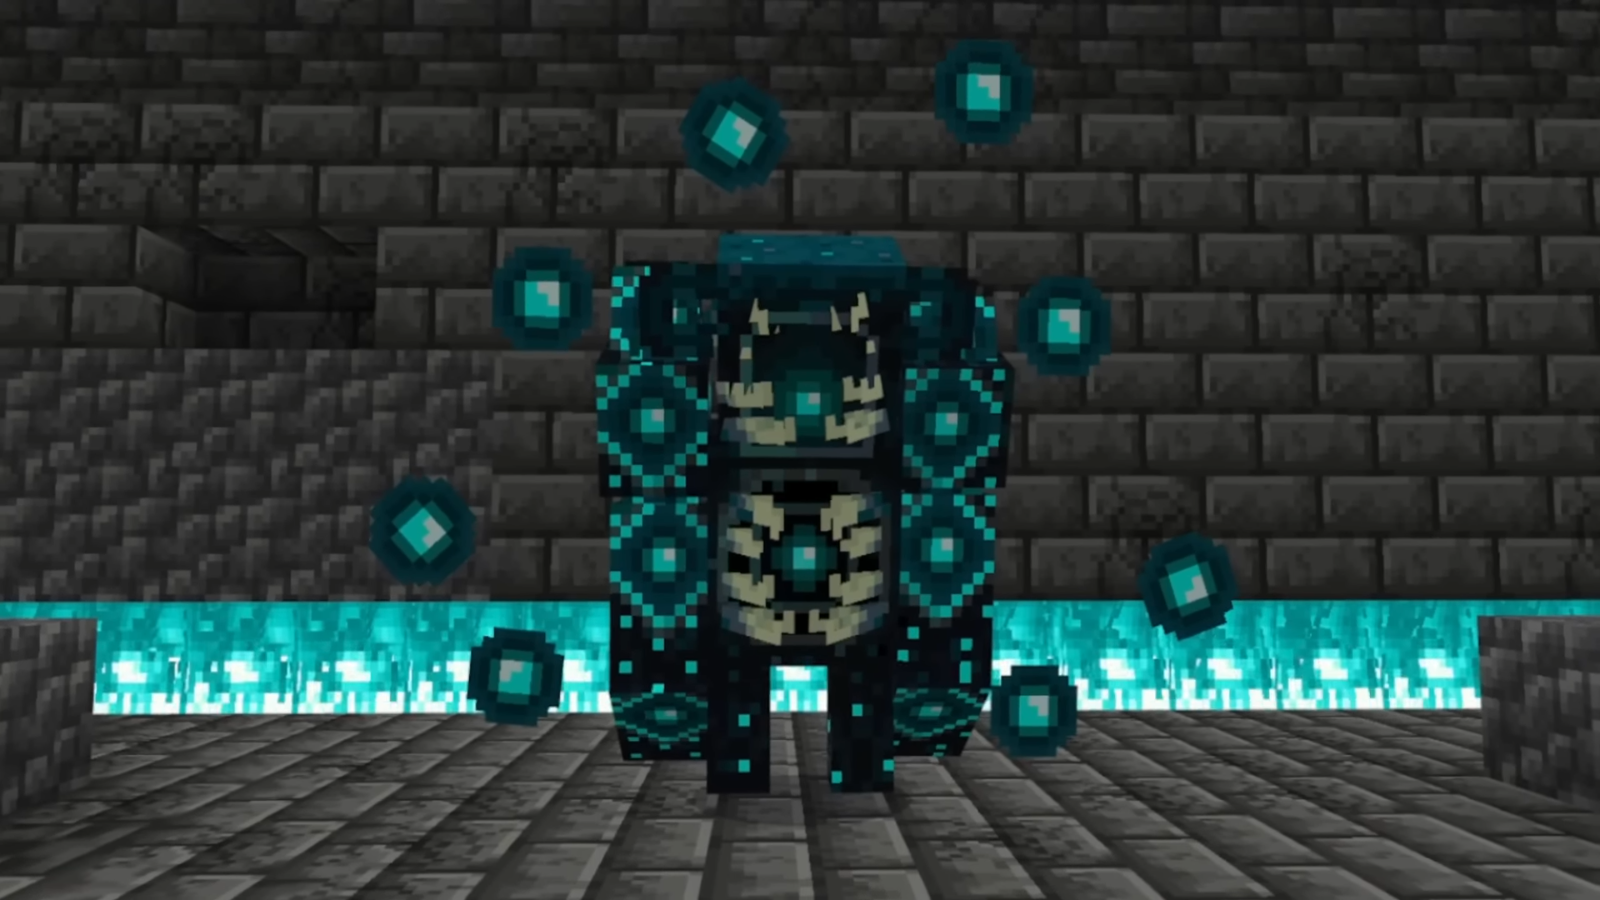 The Sculk Boss from the 1.20 update of Minecraft.